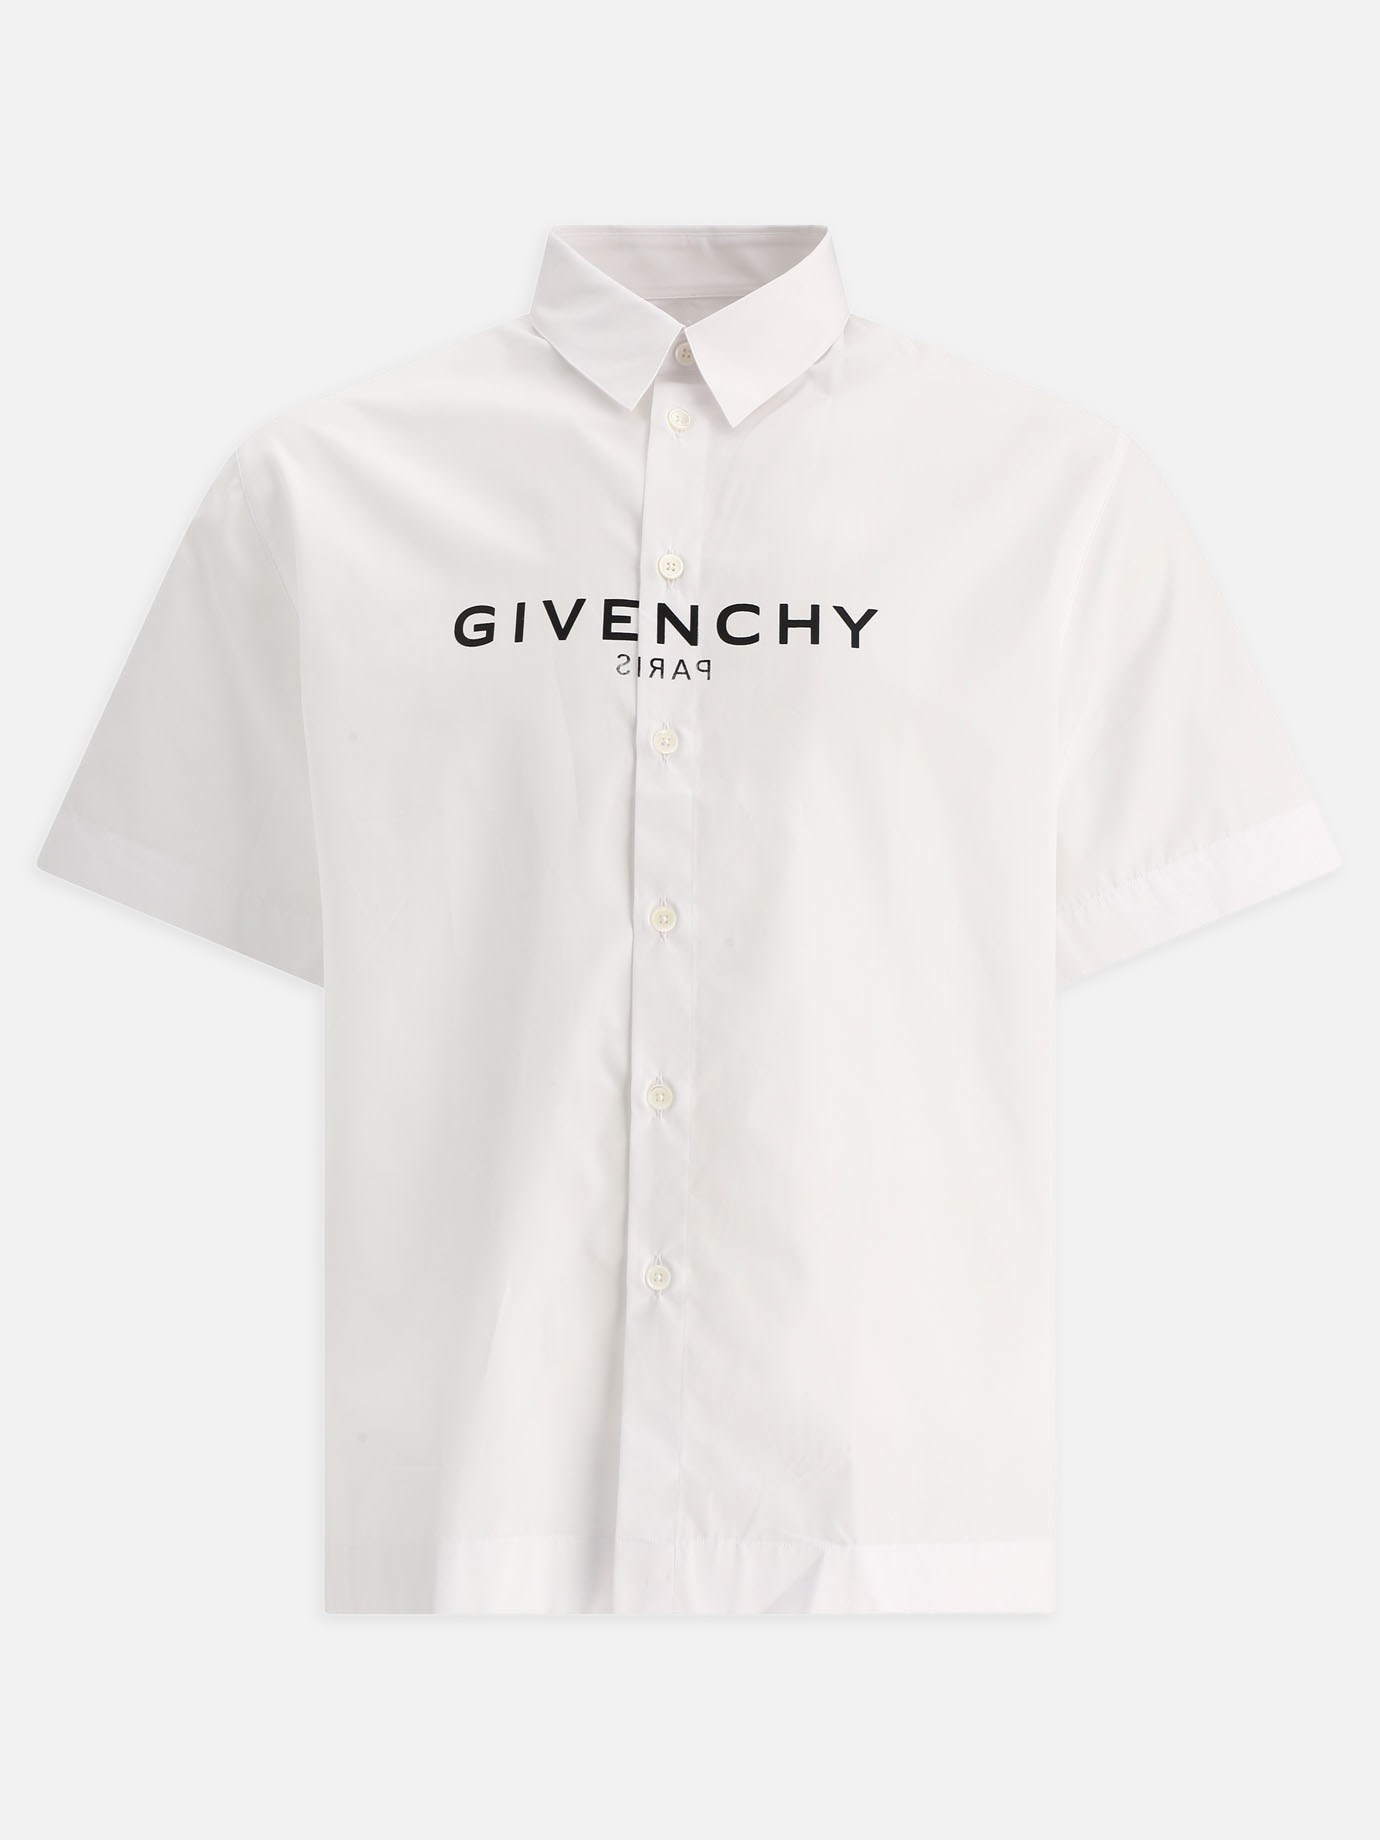  Givenchy Reverse shirtby Givenchy - 10